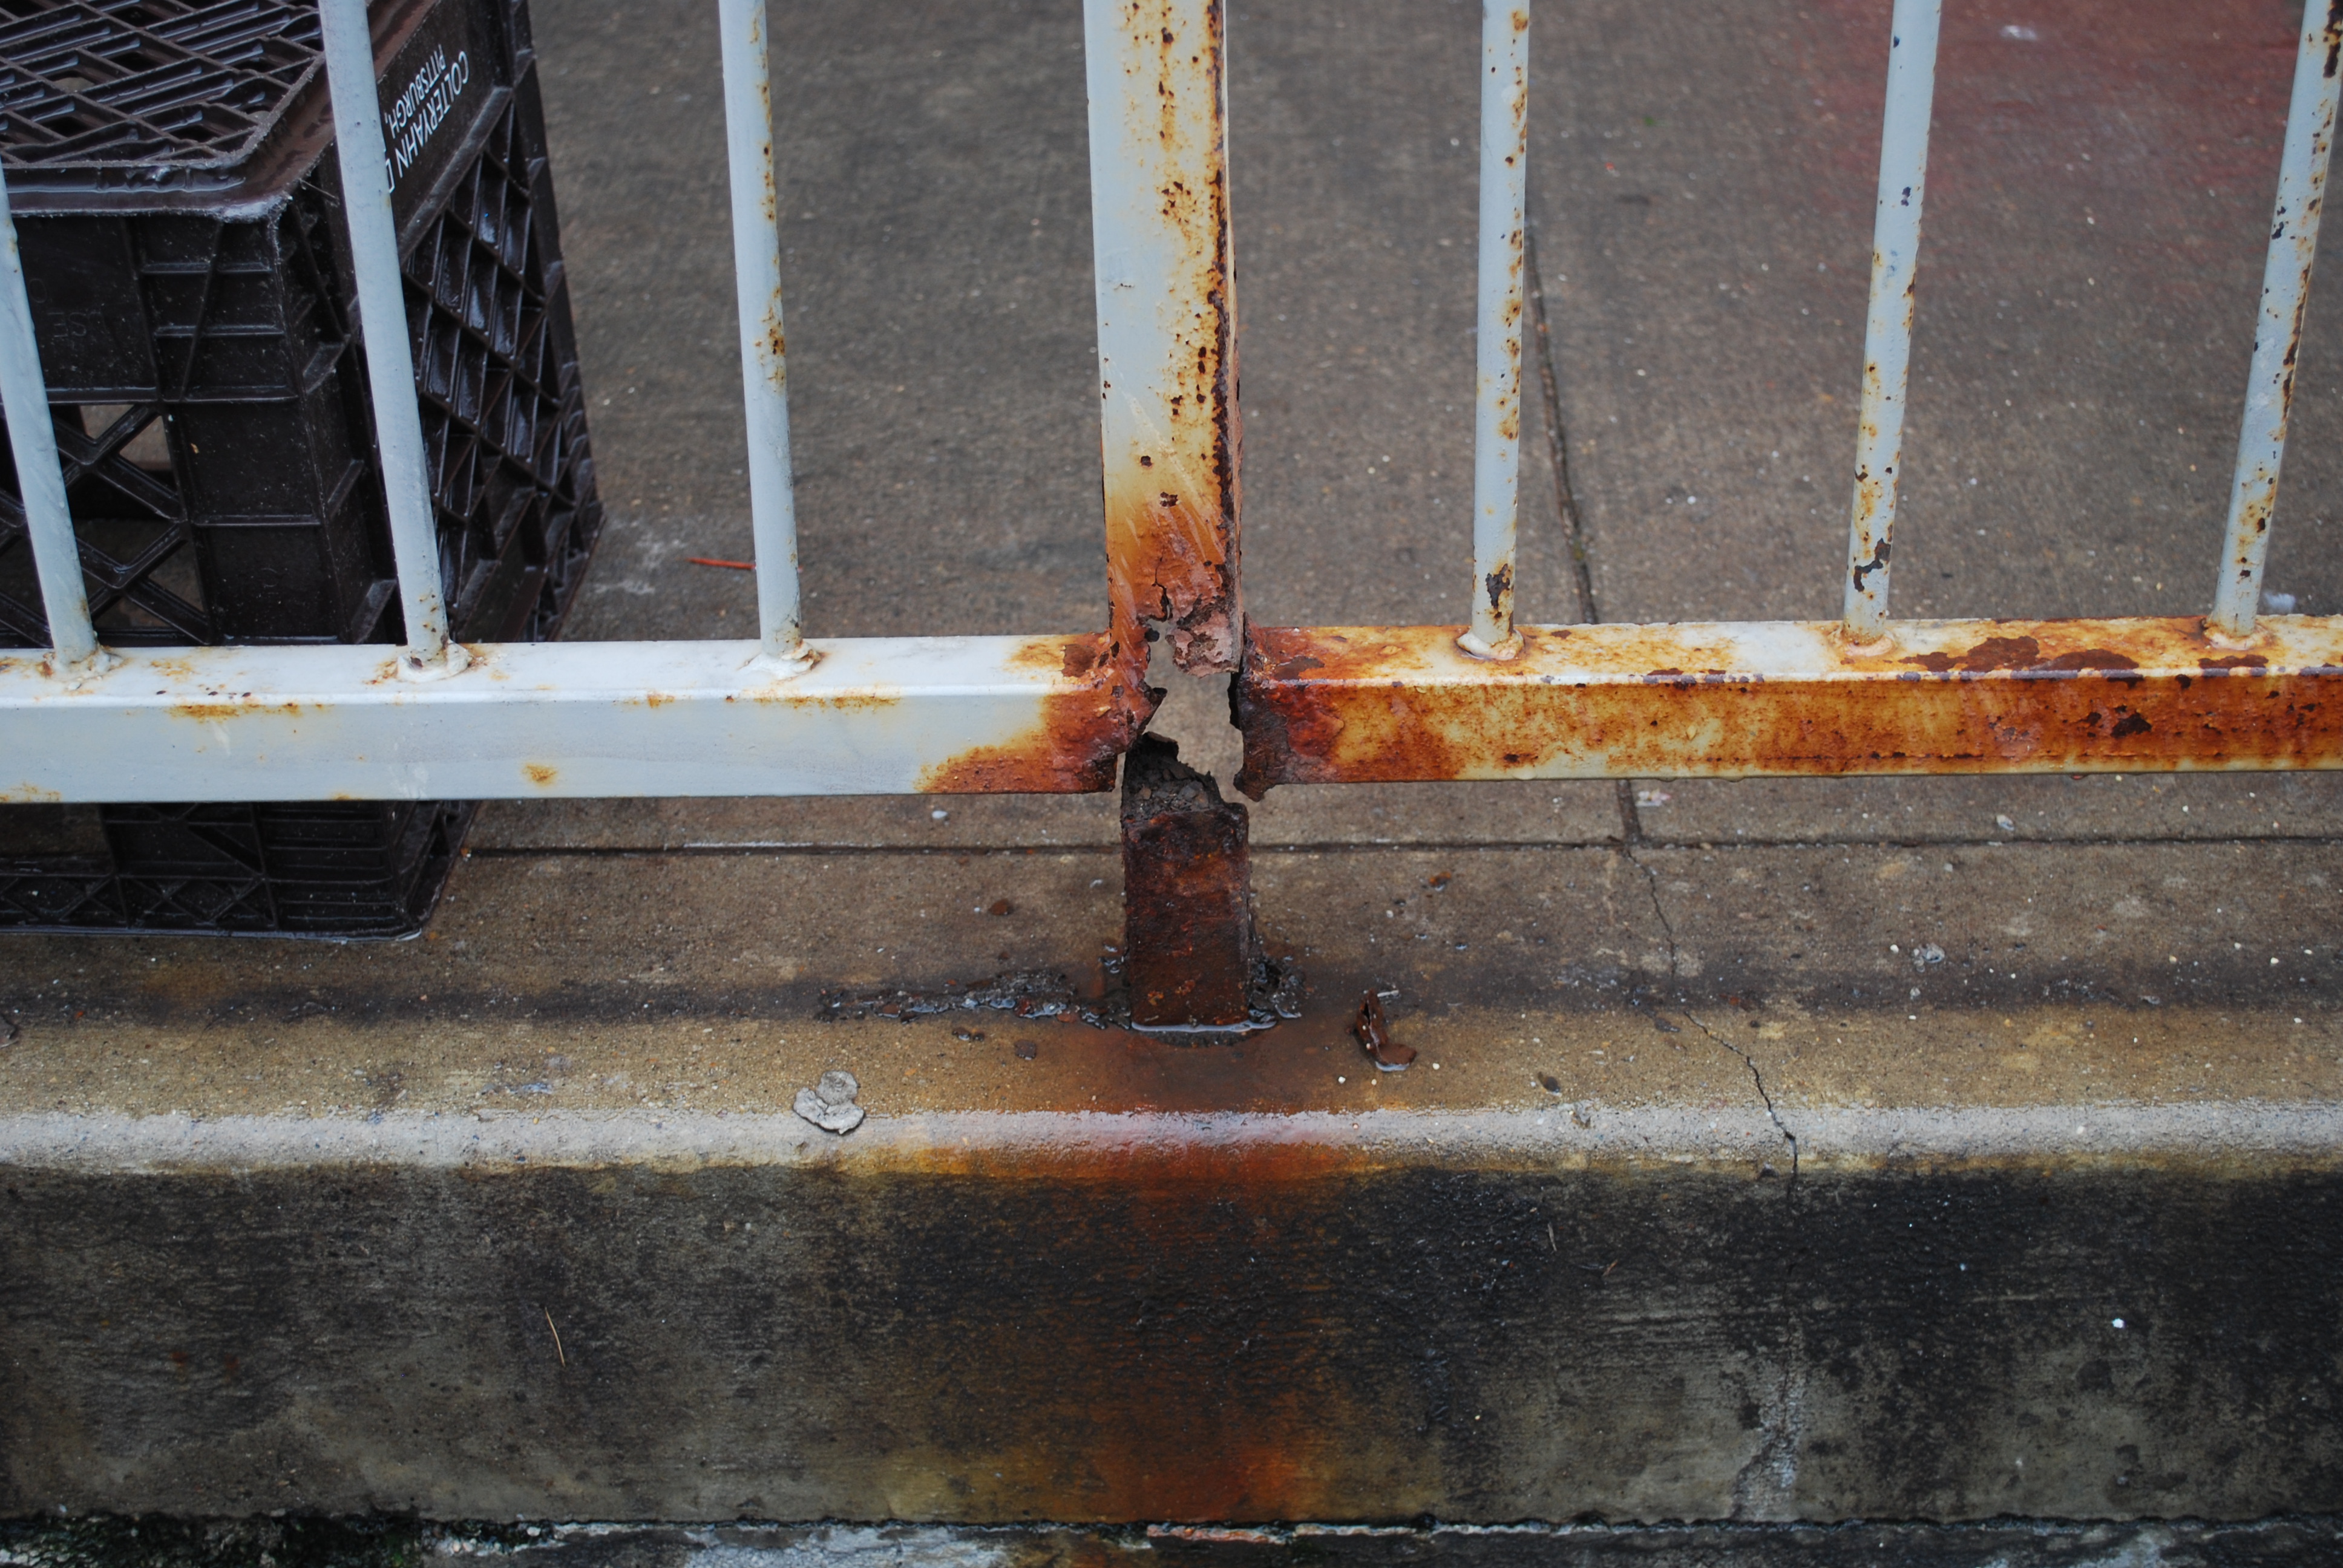 What to do with rusted metal handrail?